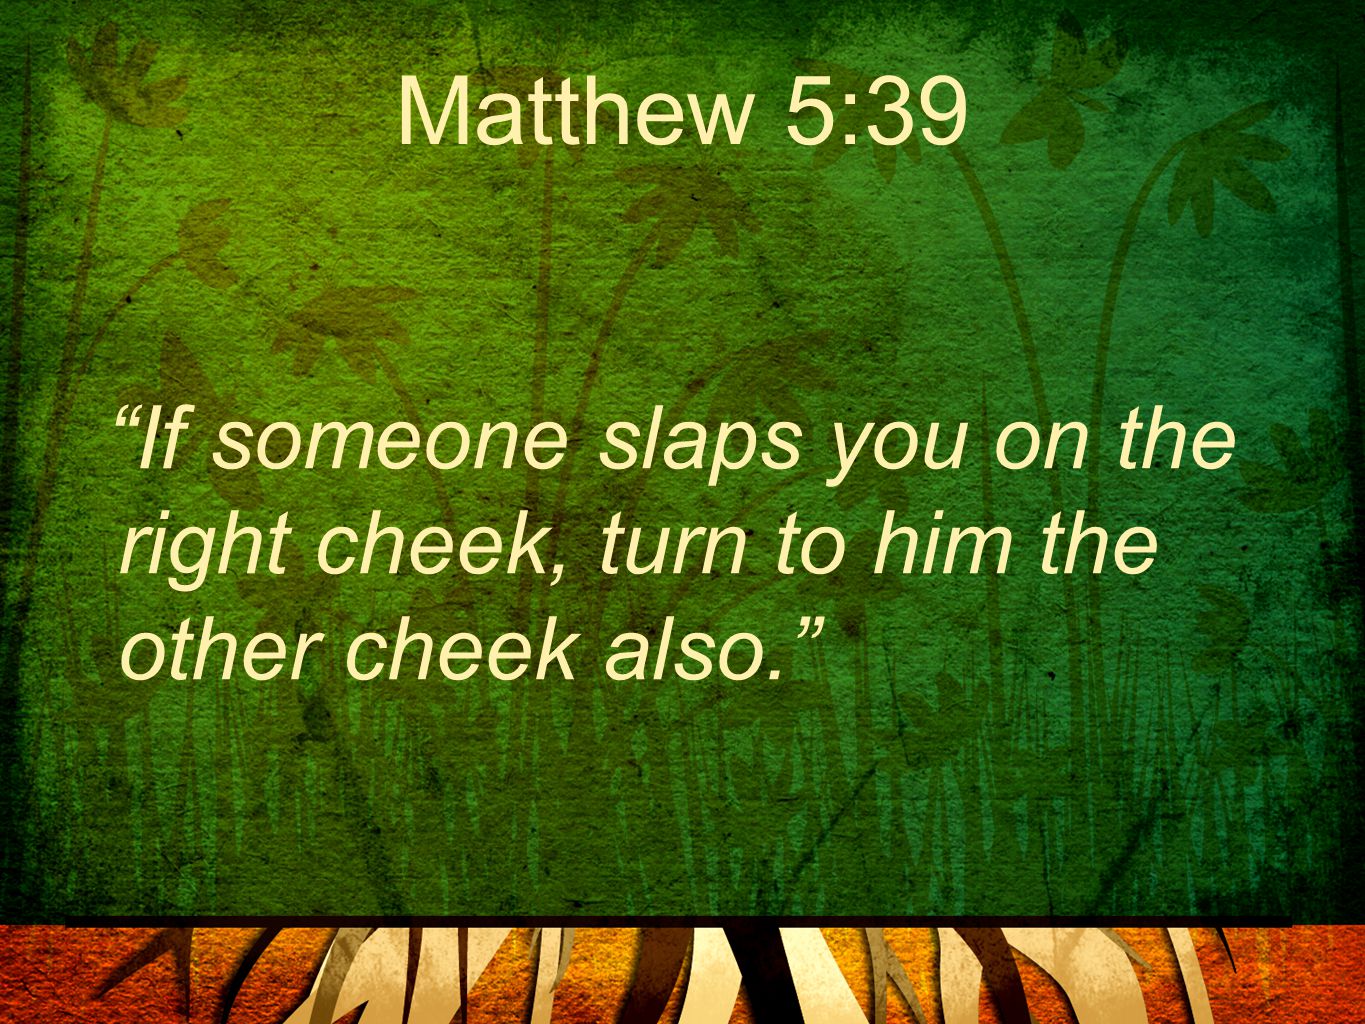 Matthew 5:39 If someone slaps you on the right cheek, turn to him the other cheek also.